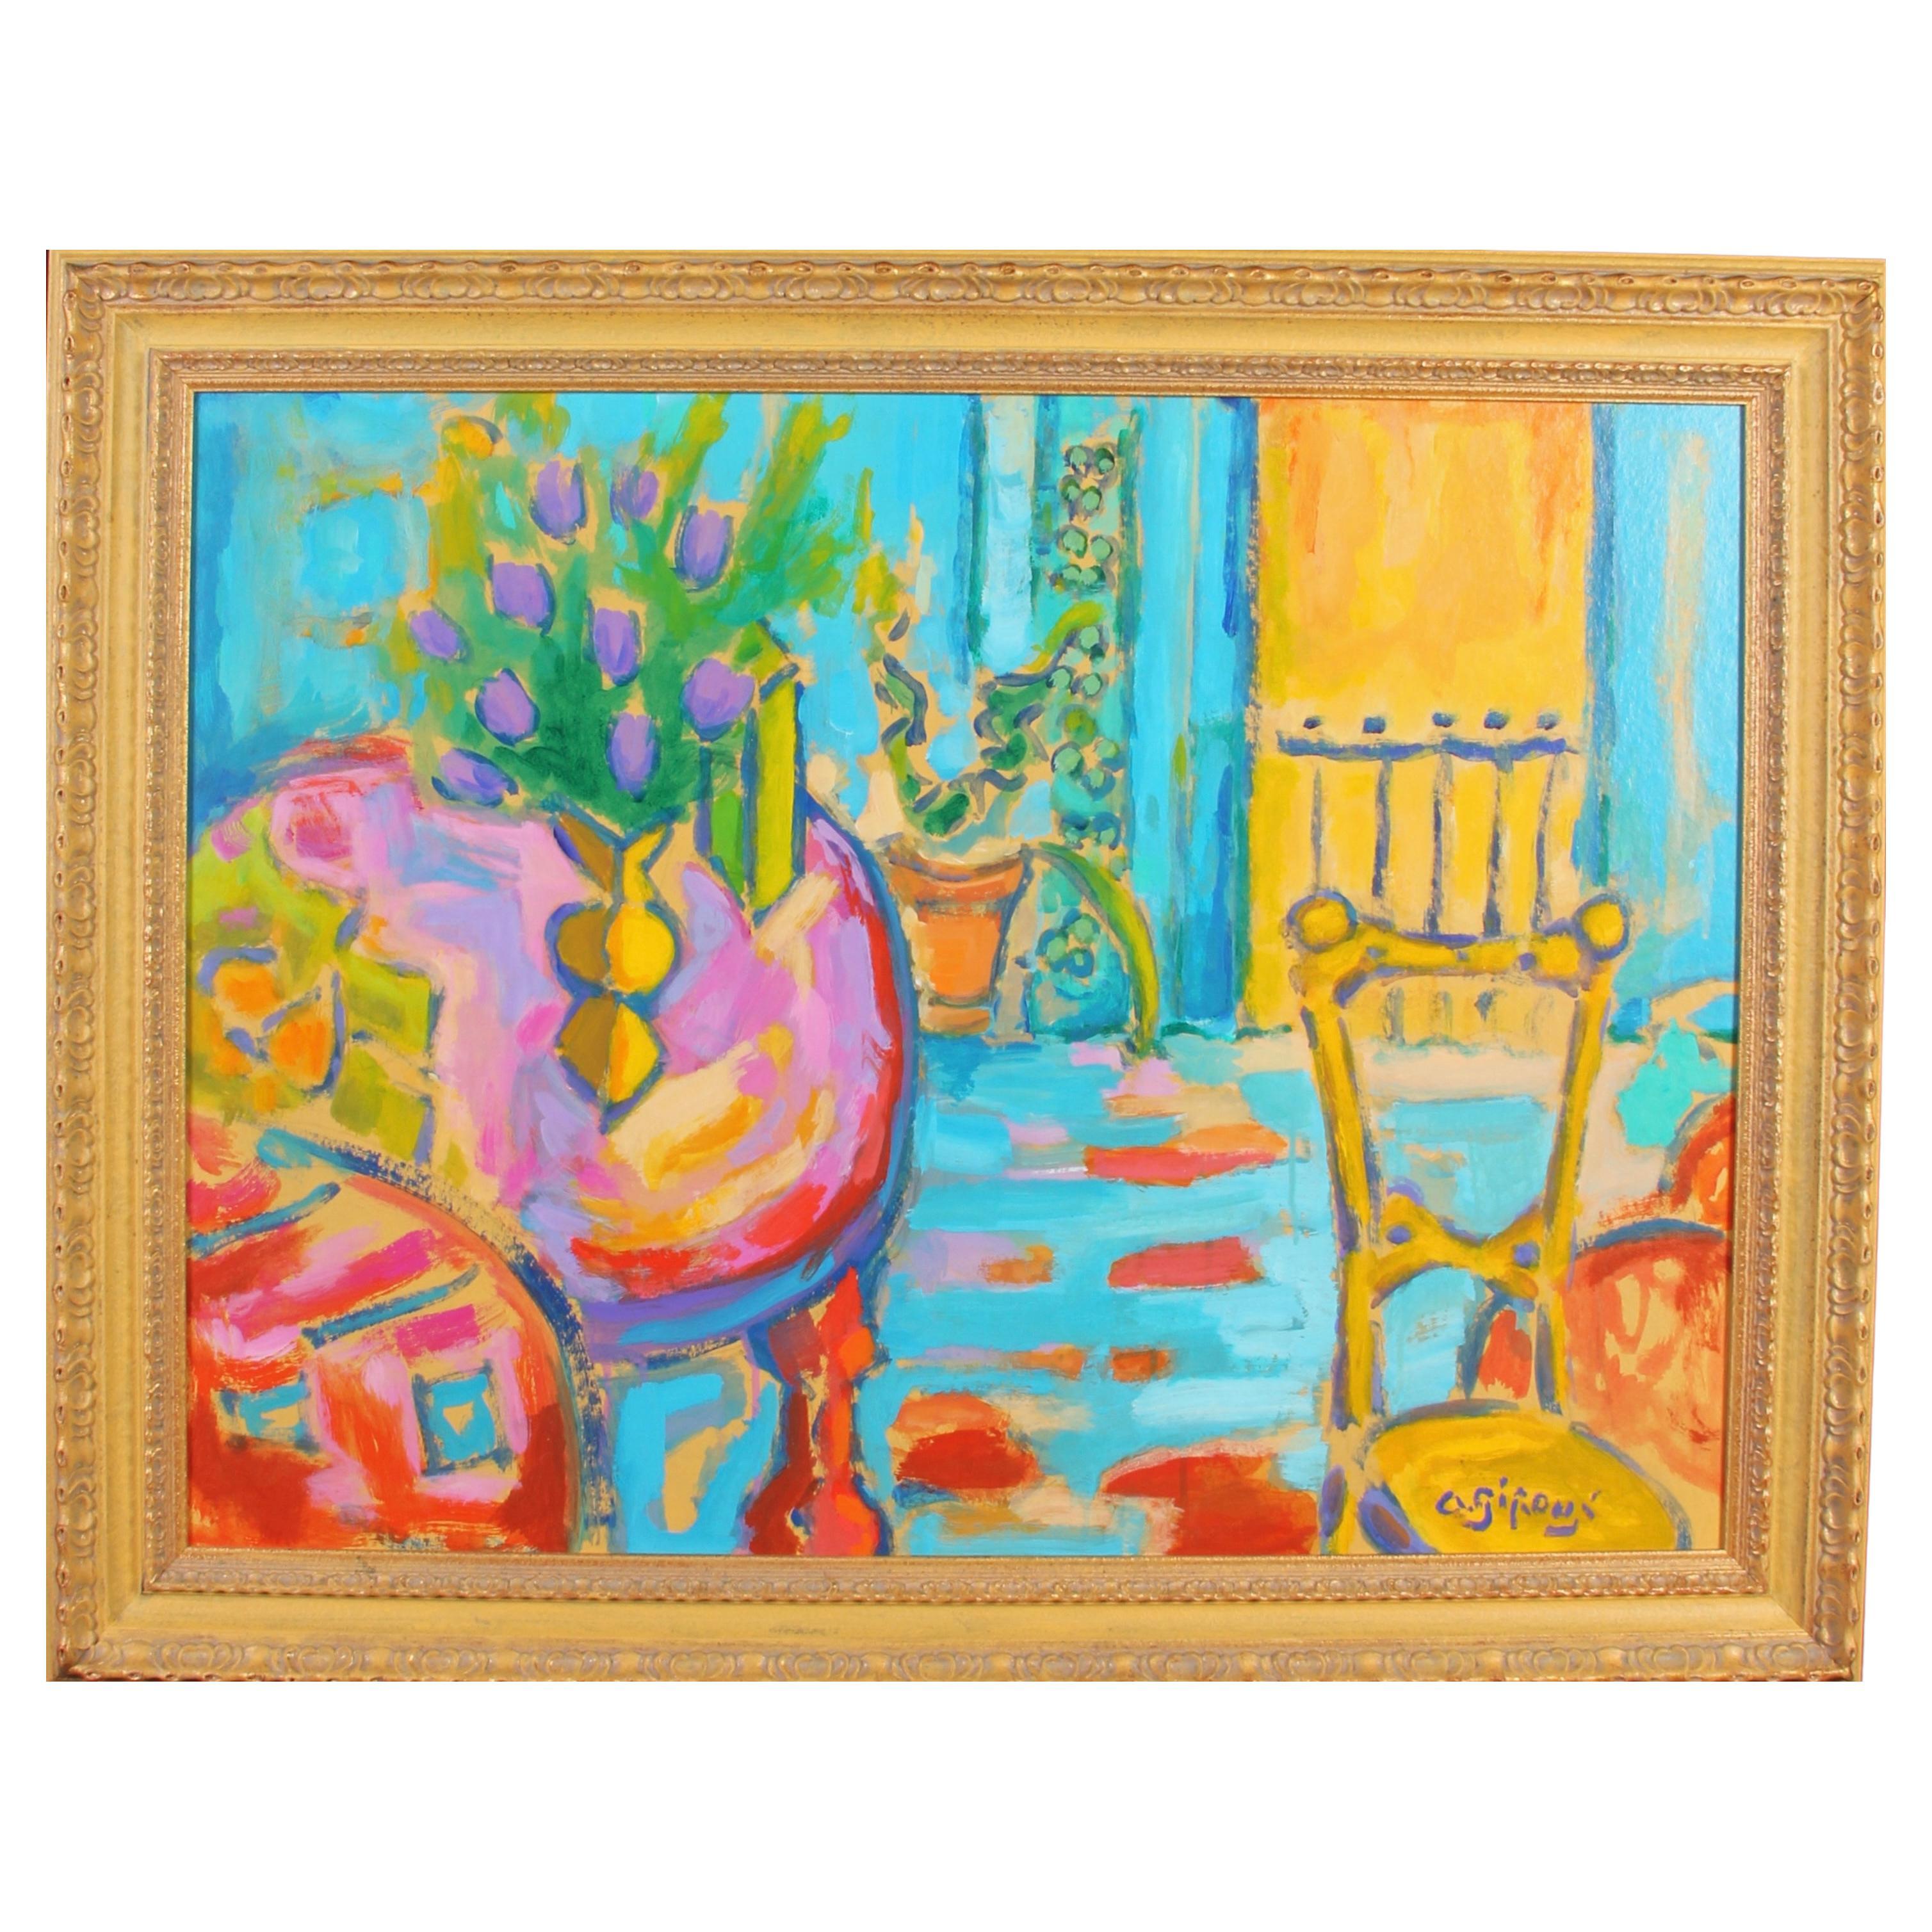 Antoine Giroux Fauvist Painting - Interior - Ref 143 For Sale